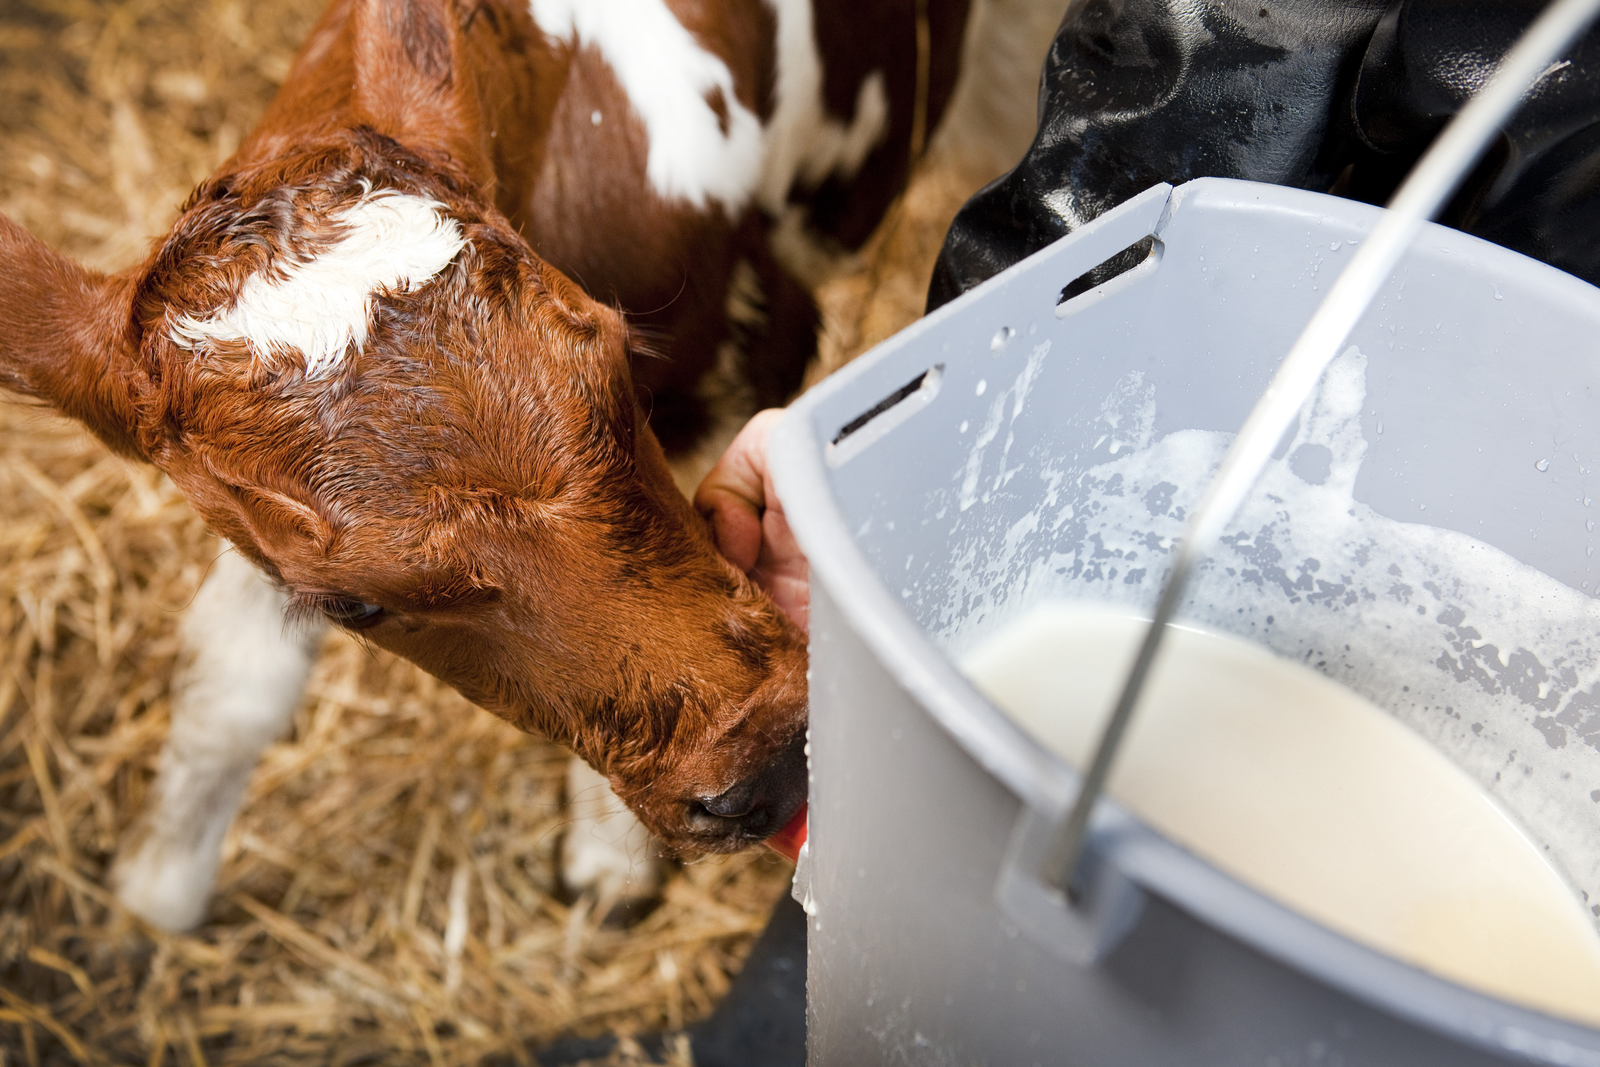 Bacteria counts too high in colostrum